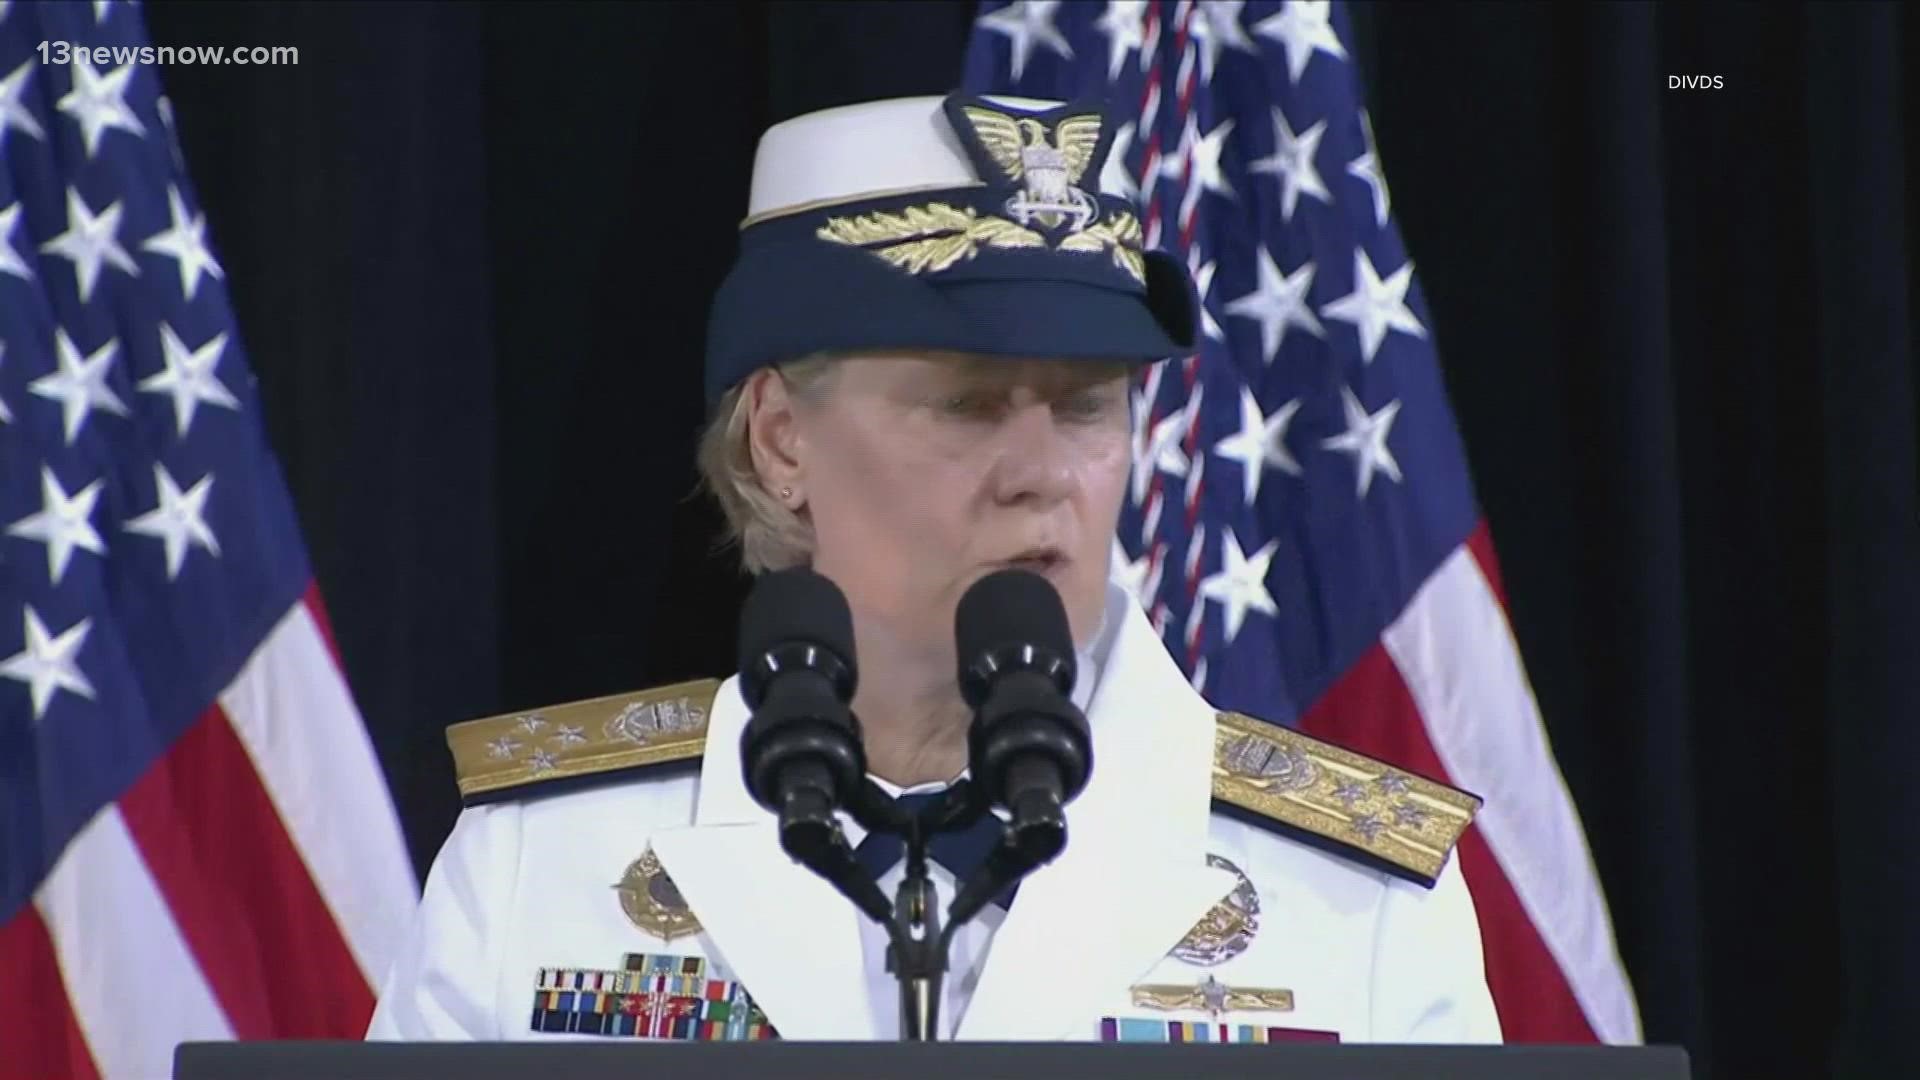 She's the first woman to lead a branch of the armed forces in America.